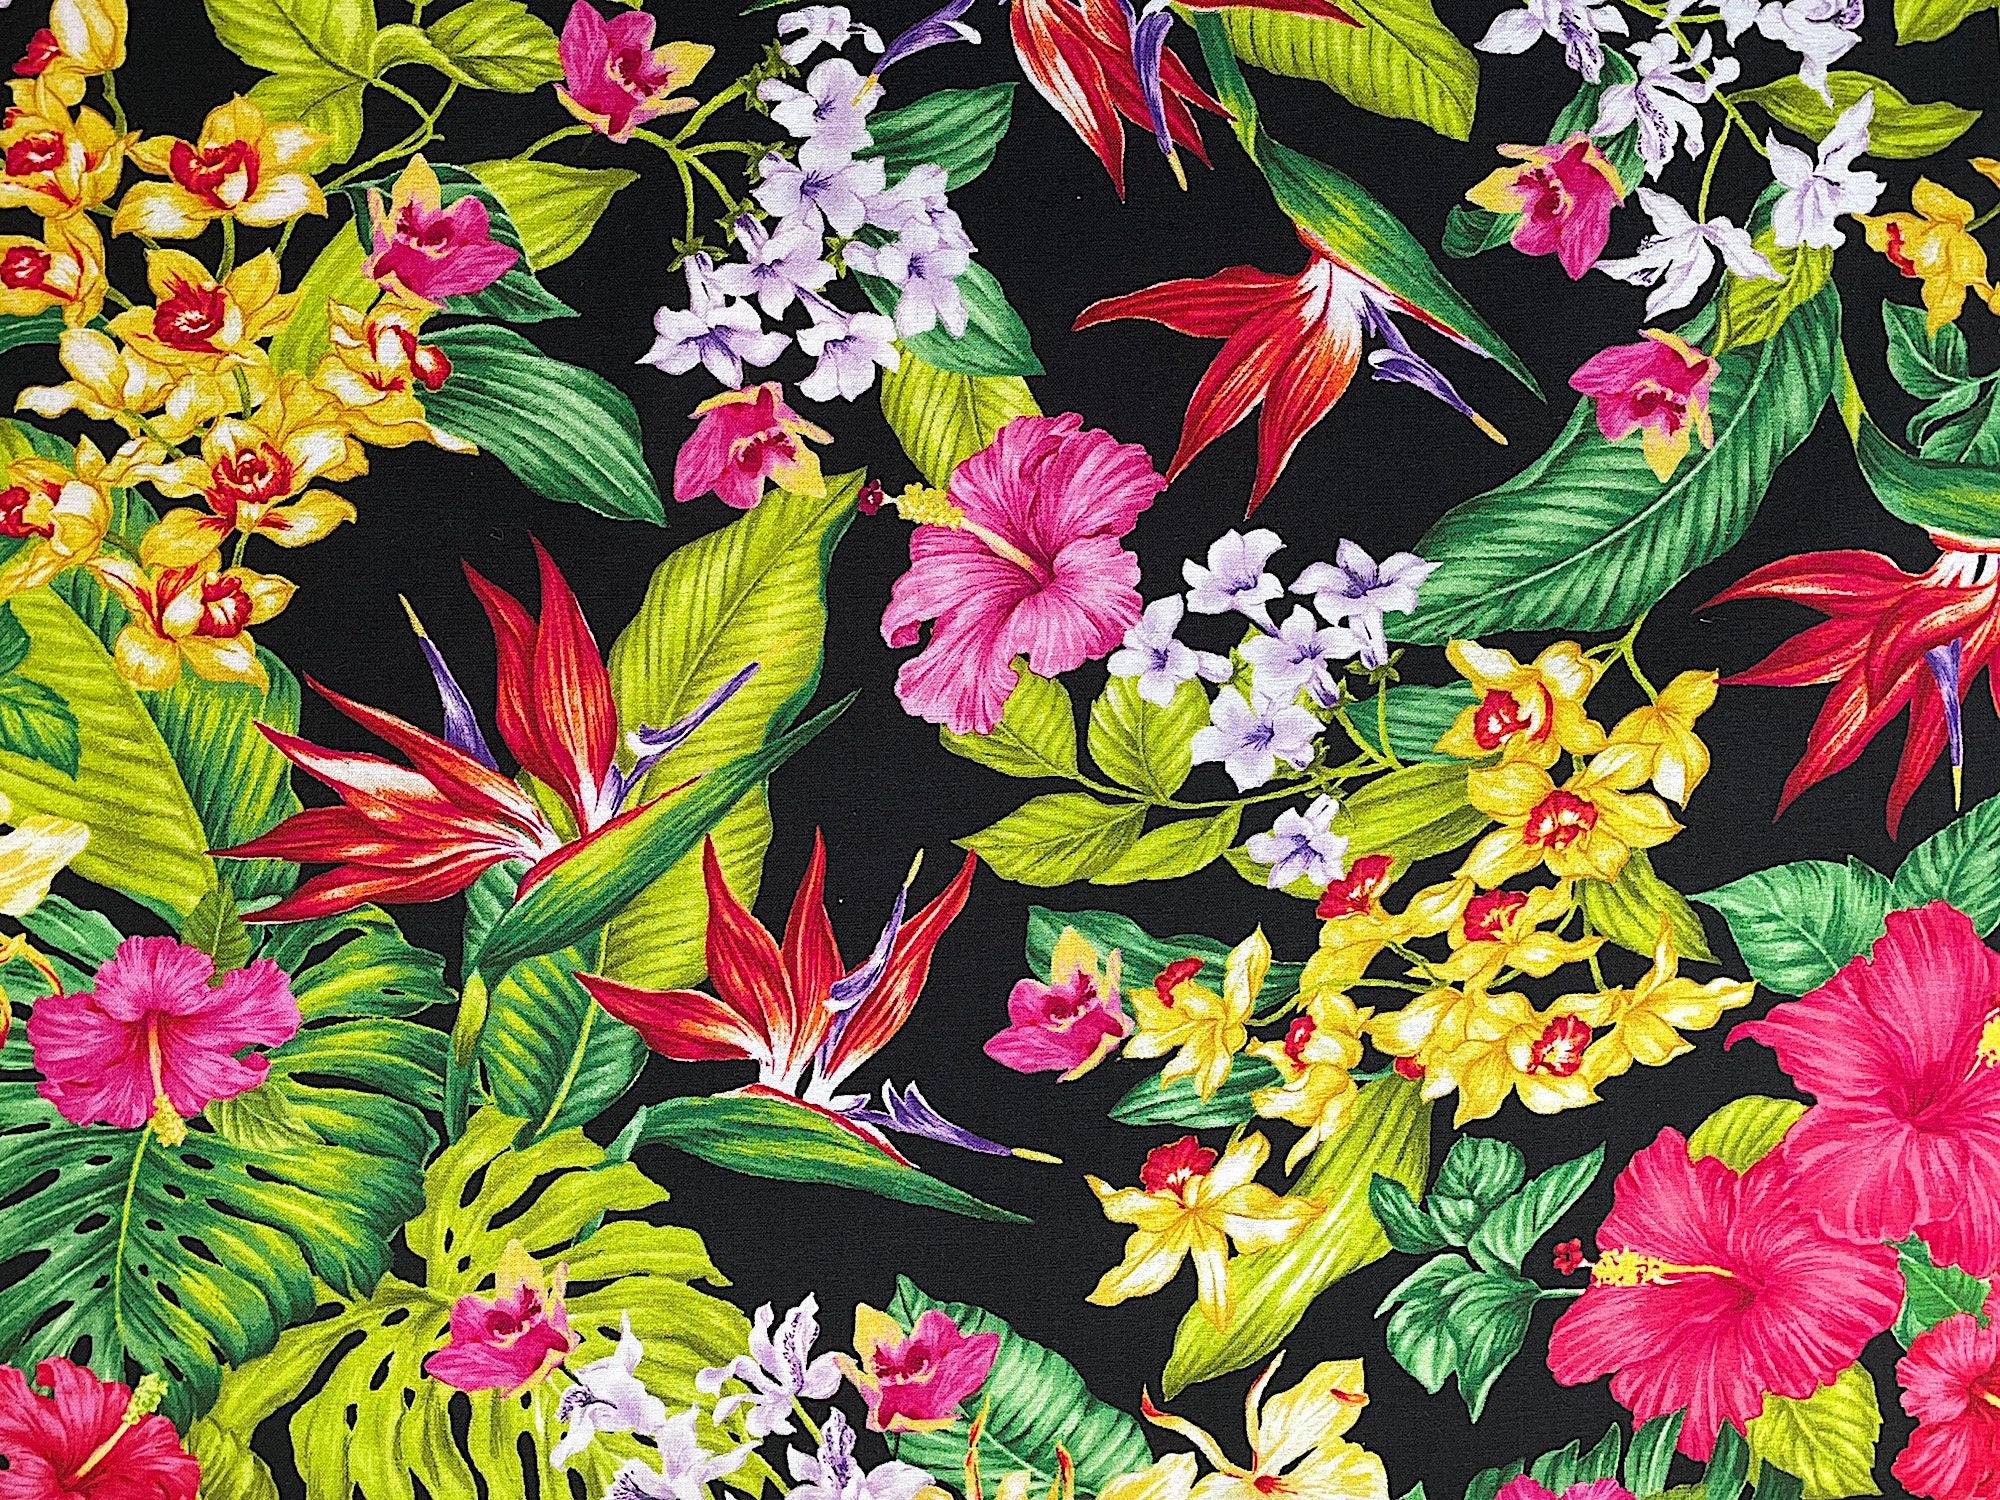 This Tropical flower fabric is part of the Tropical Escape collection by Kanvas Studio. This black fabric is covered with tropical flowers such as hibiscus and palm leaves.